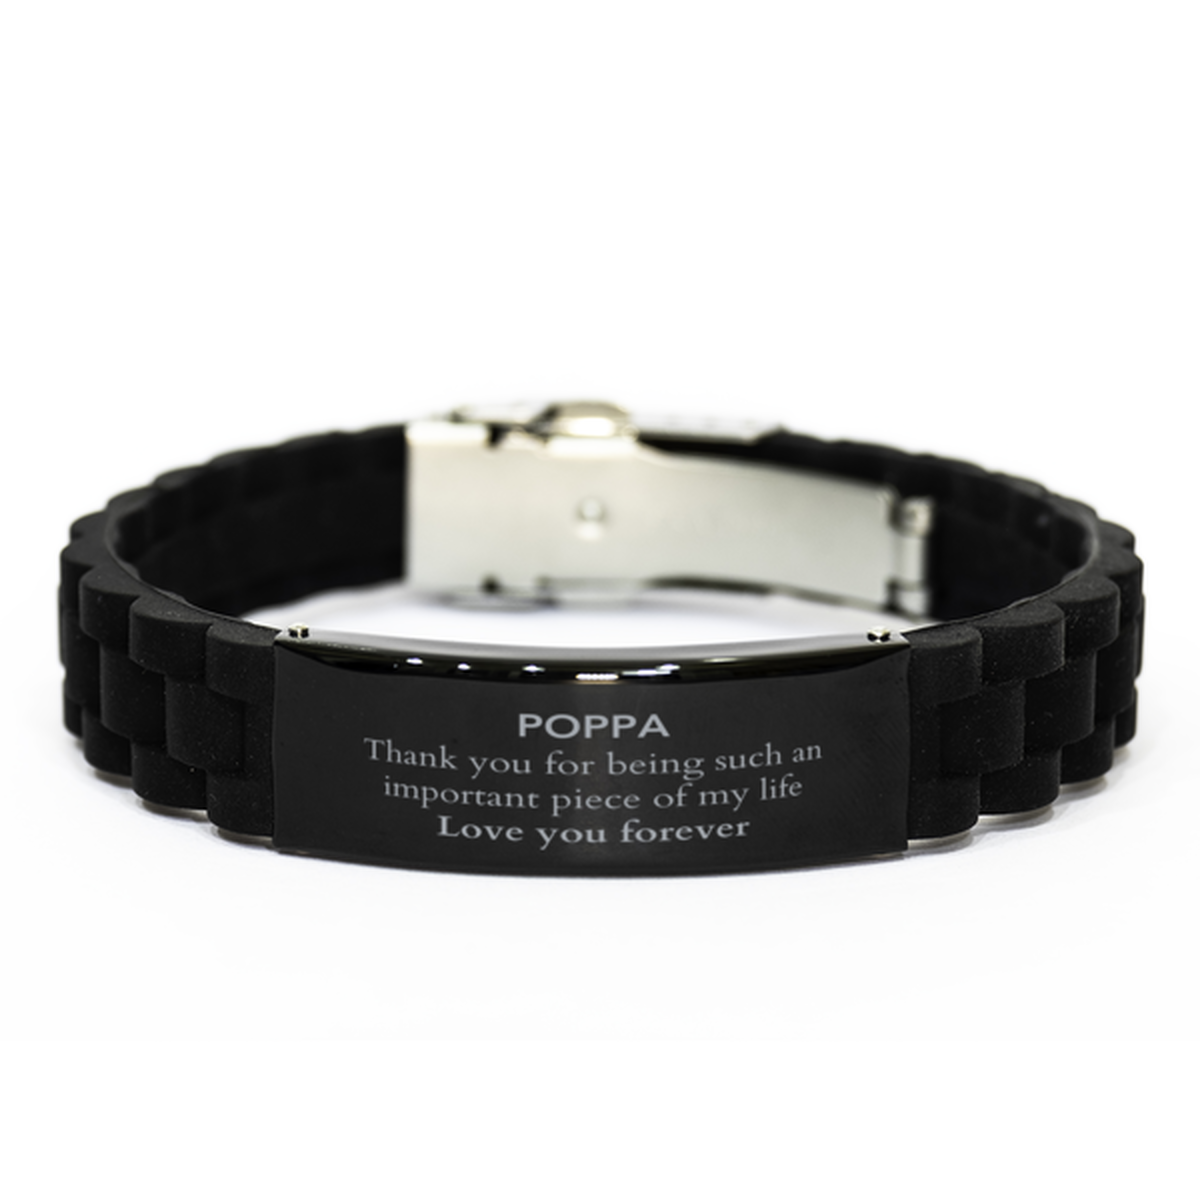 Appropriate Poppa Black Glidelock Clasp Bracelet Epic Birthday Gifts for Poppa Thank you for being such an important piece of my life Poppa Christmas Mothers Fathers Day